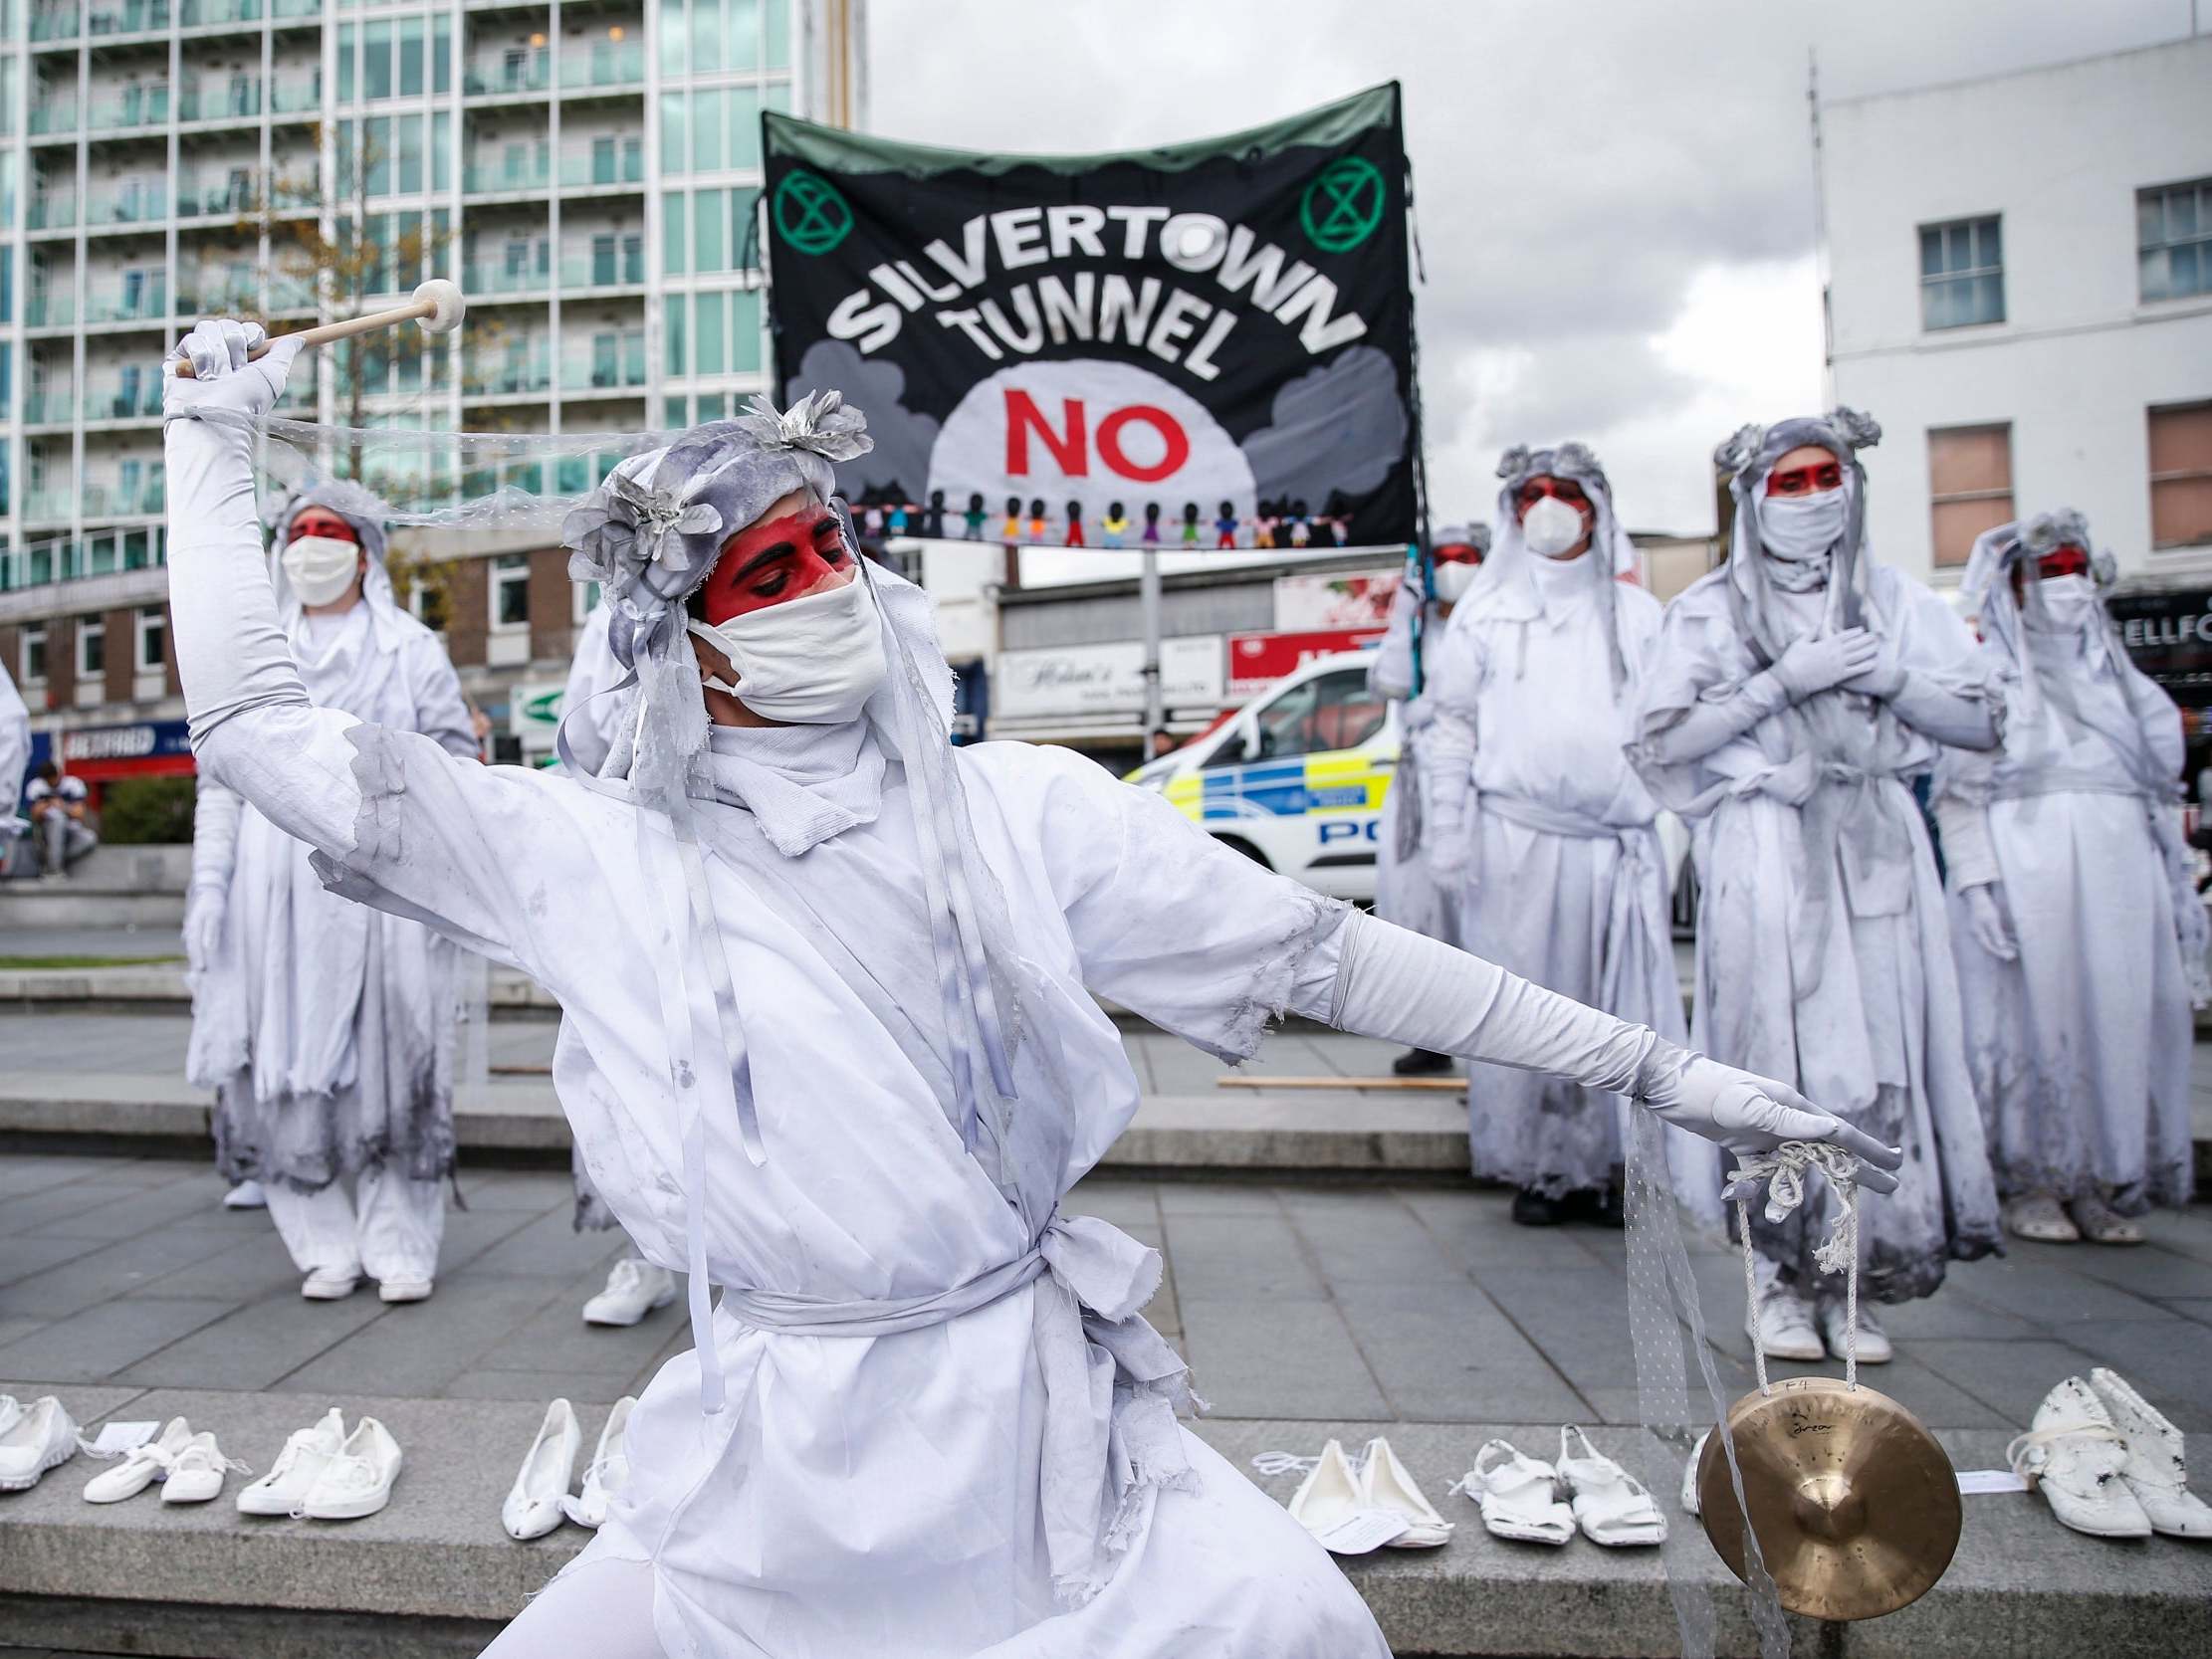 Banshees wail during an Extinction Rebellion protest against a new road tunnel under the Thames in southeast London.